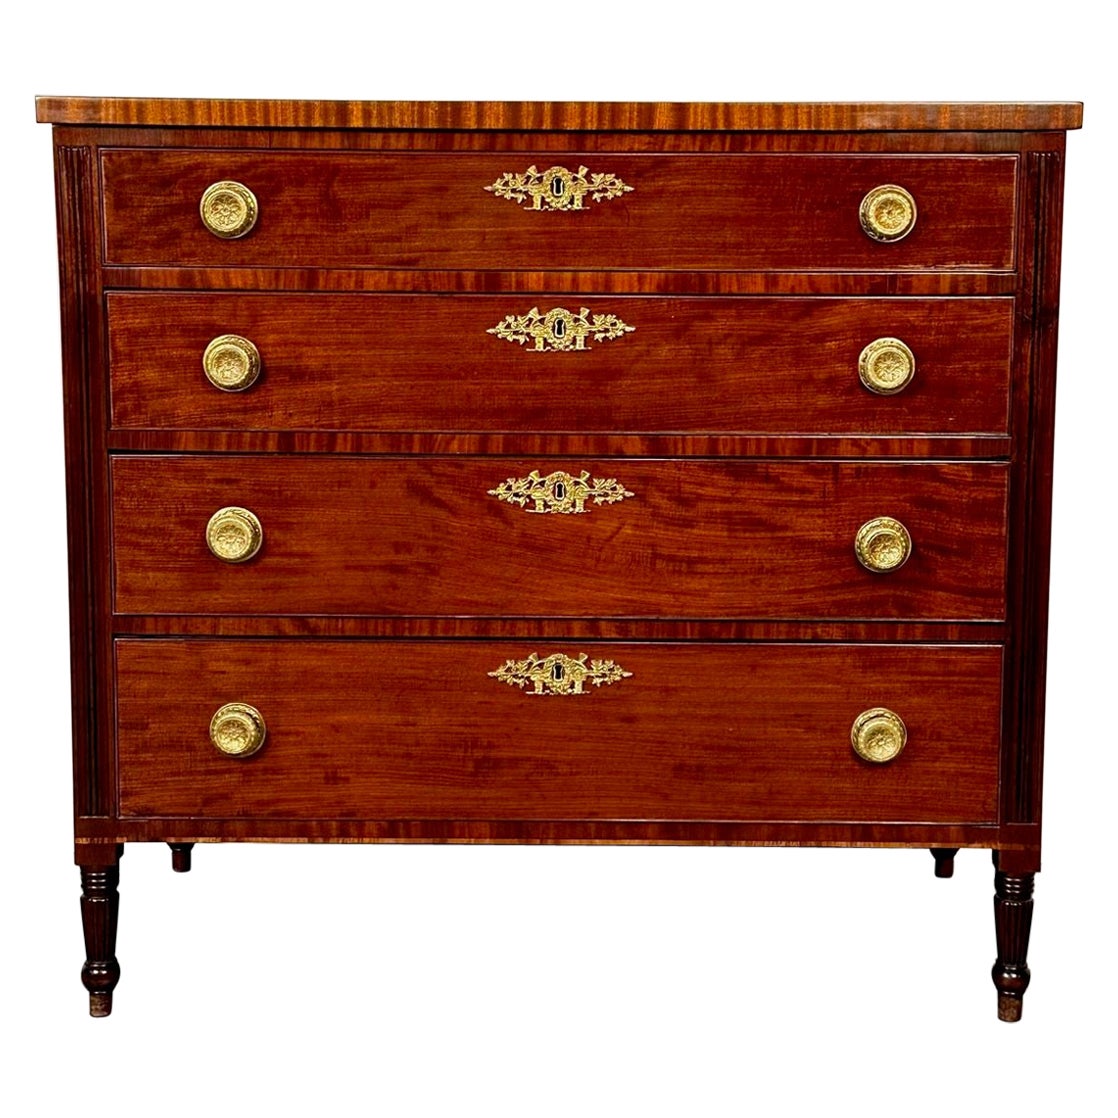 Polished 18th/19th Century Mahogany Chest, Dresser or Commode, Bronze Accents For Sale